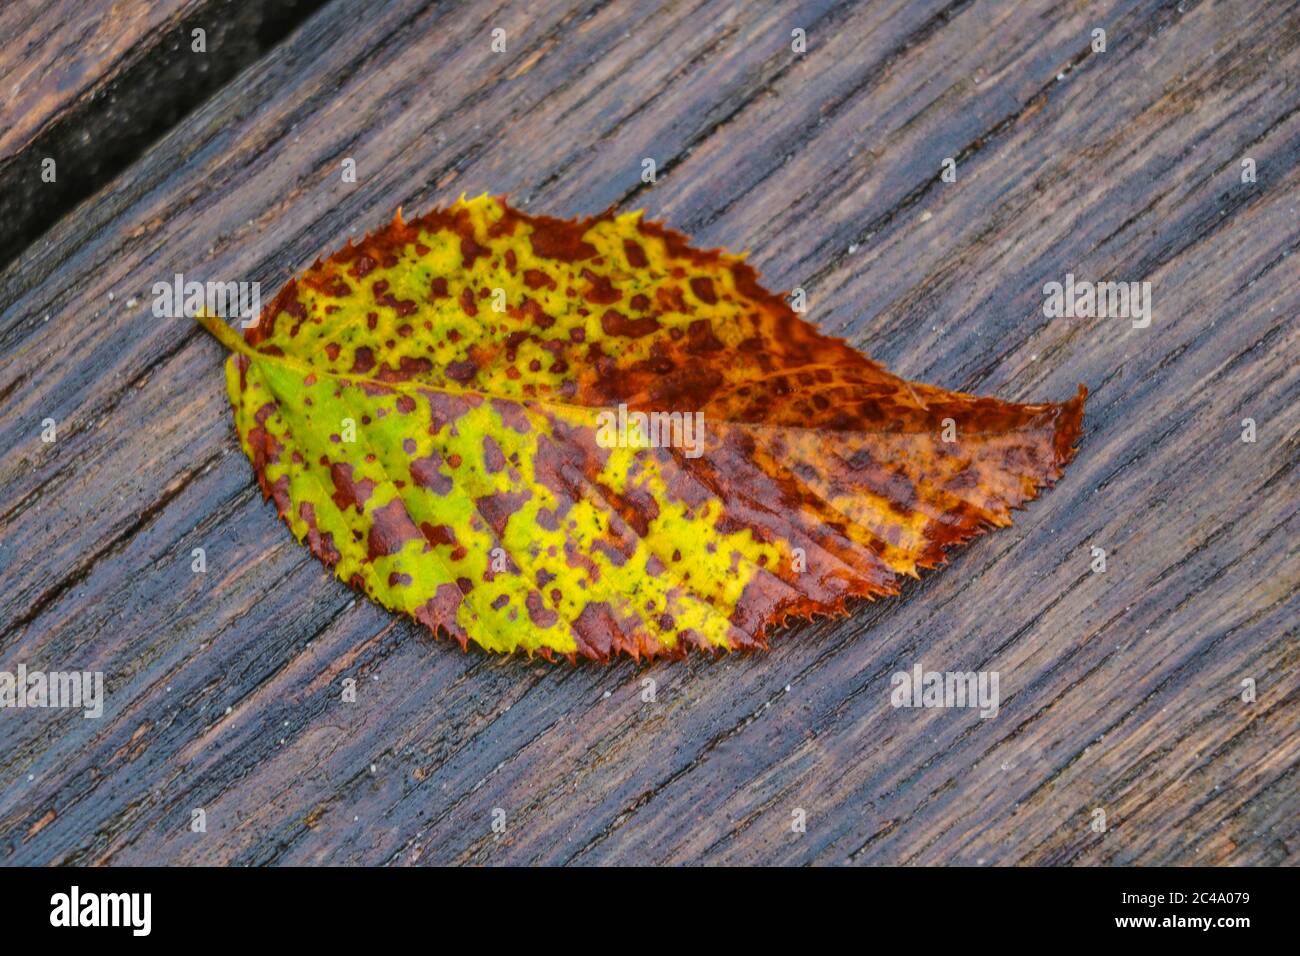 A yellowed leaf from a tree lies on a table. The onset of autumn. Change of season Stock Photo